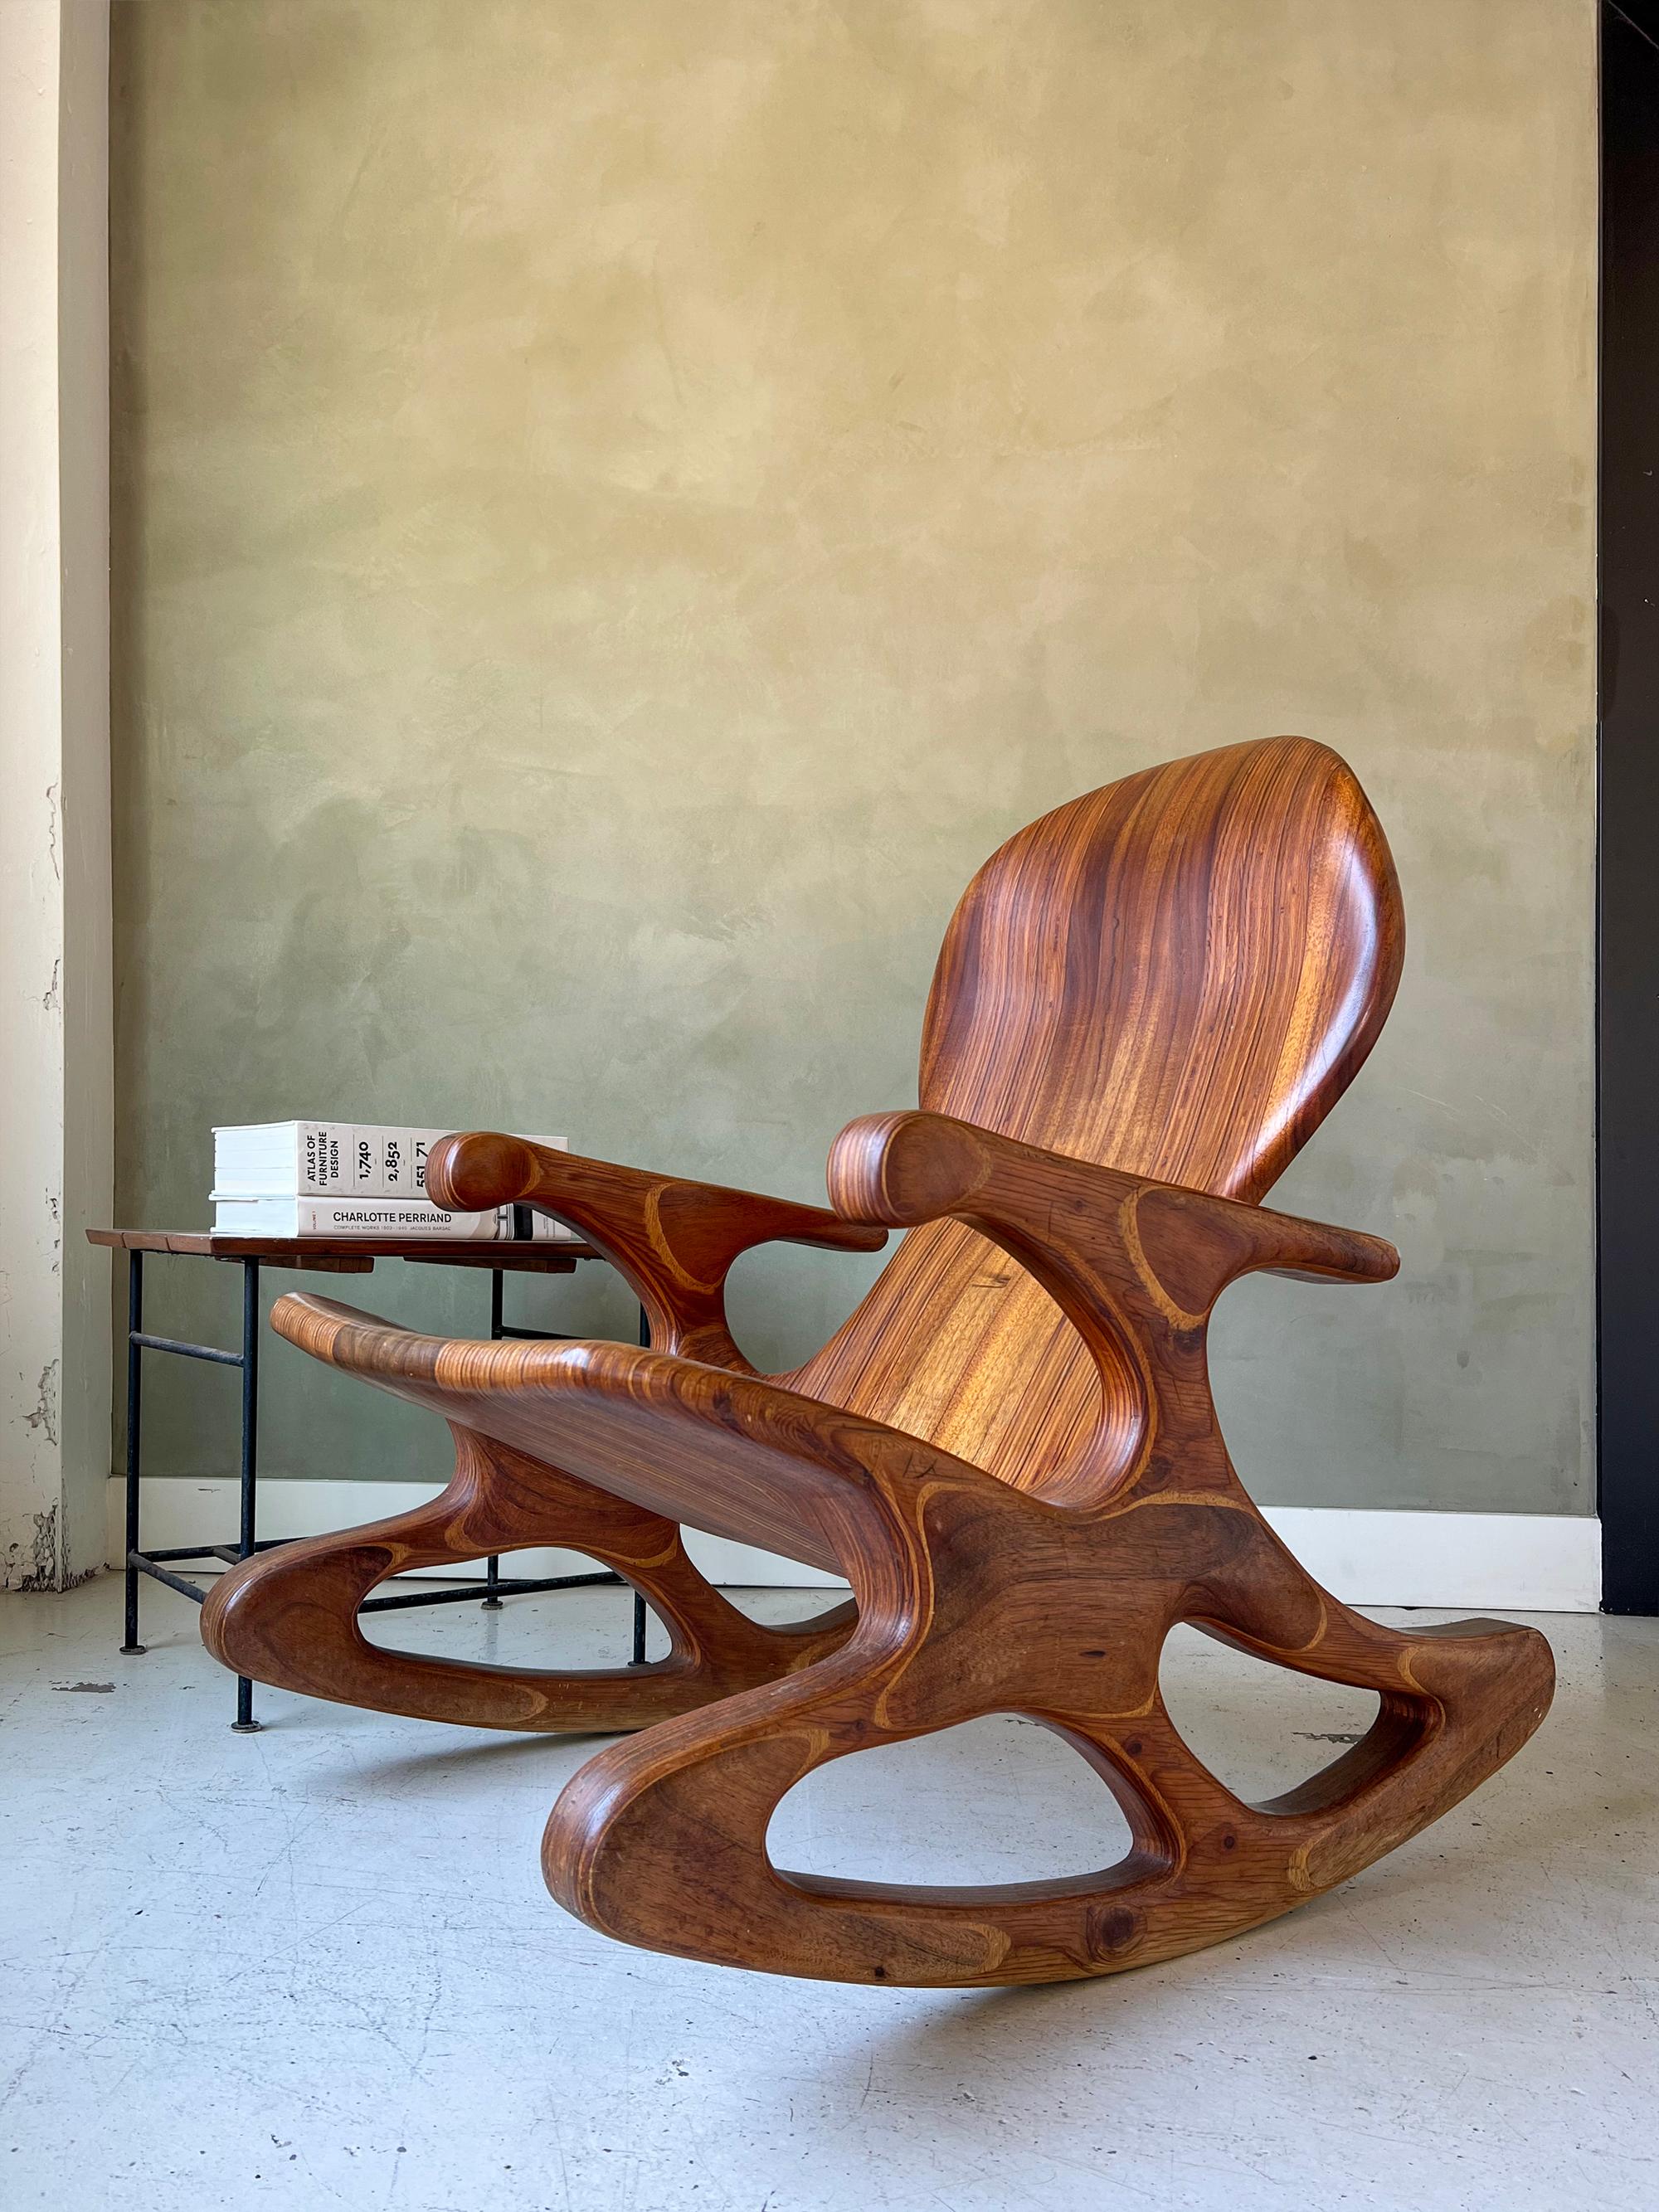 Vintage hand-sculpted rocking chair. Solid walnut core with laminated walnut plywood for the sides and base. Incredibly solid chair with ergonomic backrest and seat. One-of-a-kind and signed by 